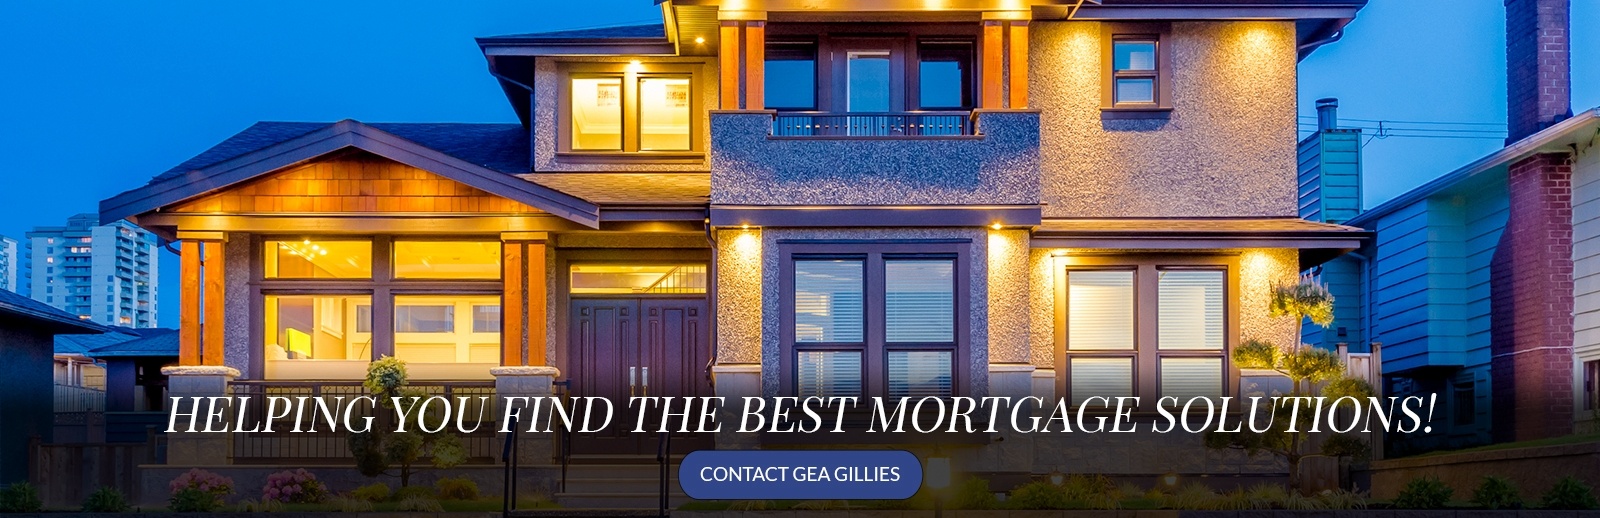 best mortgage rates Calgary 